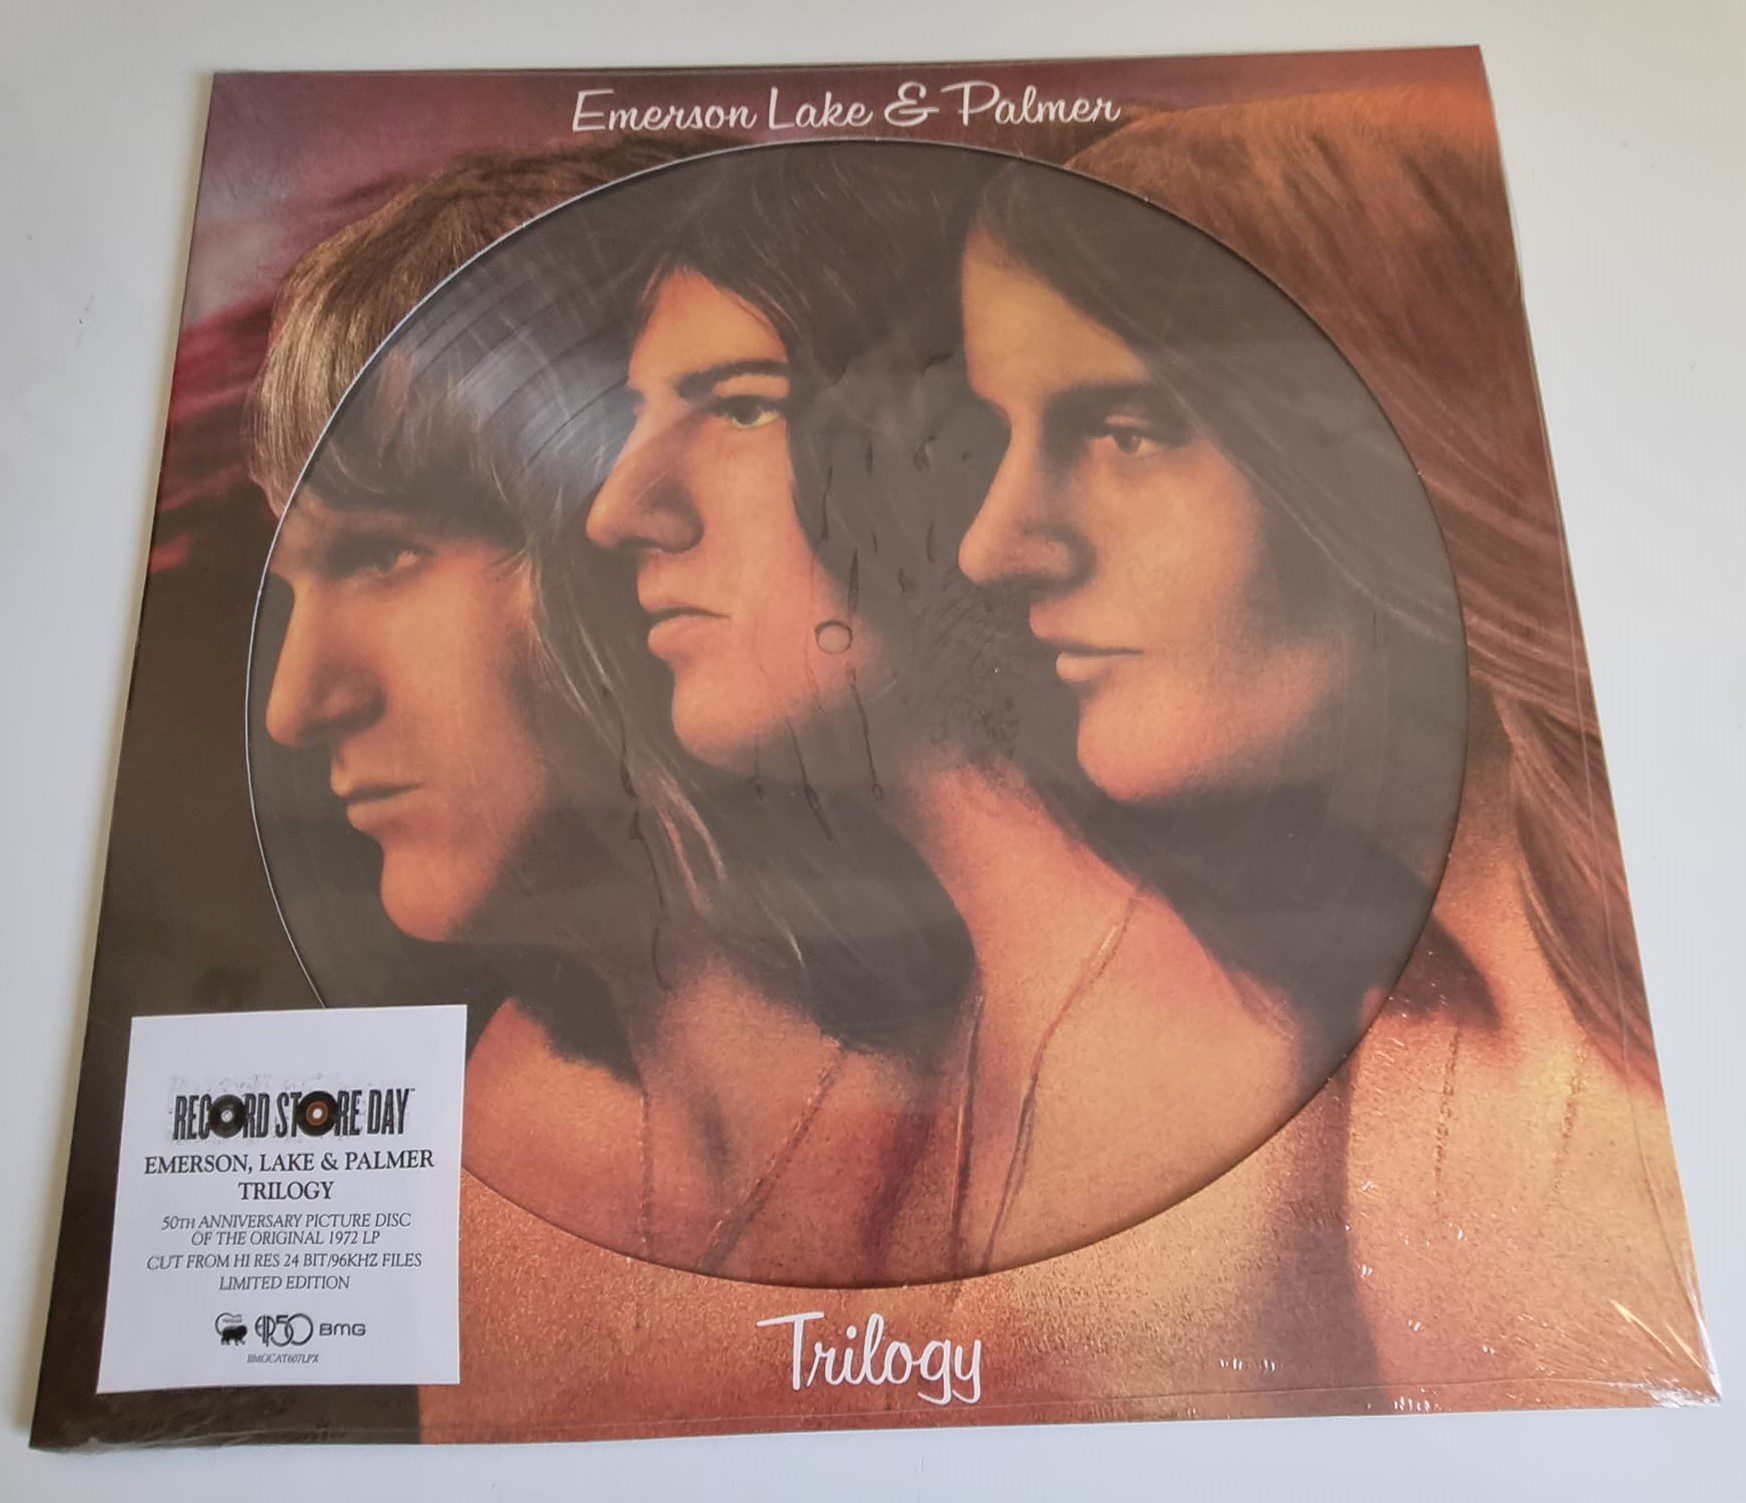 Buy this rare ELP record by clicking here